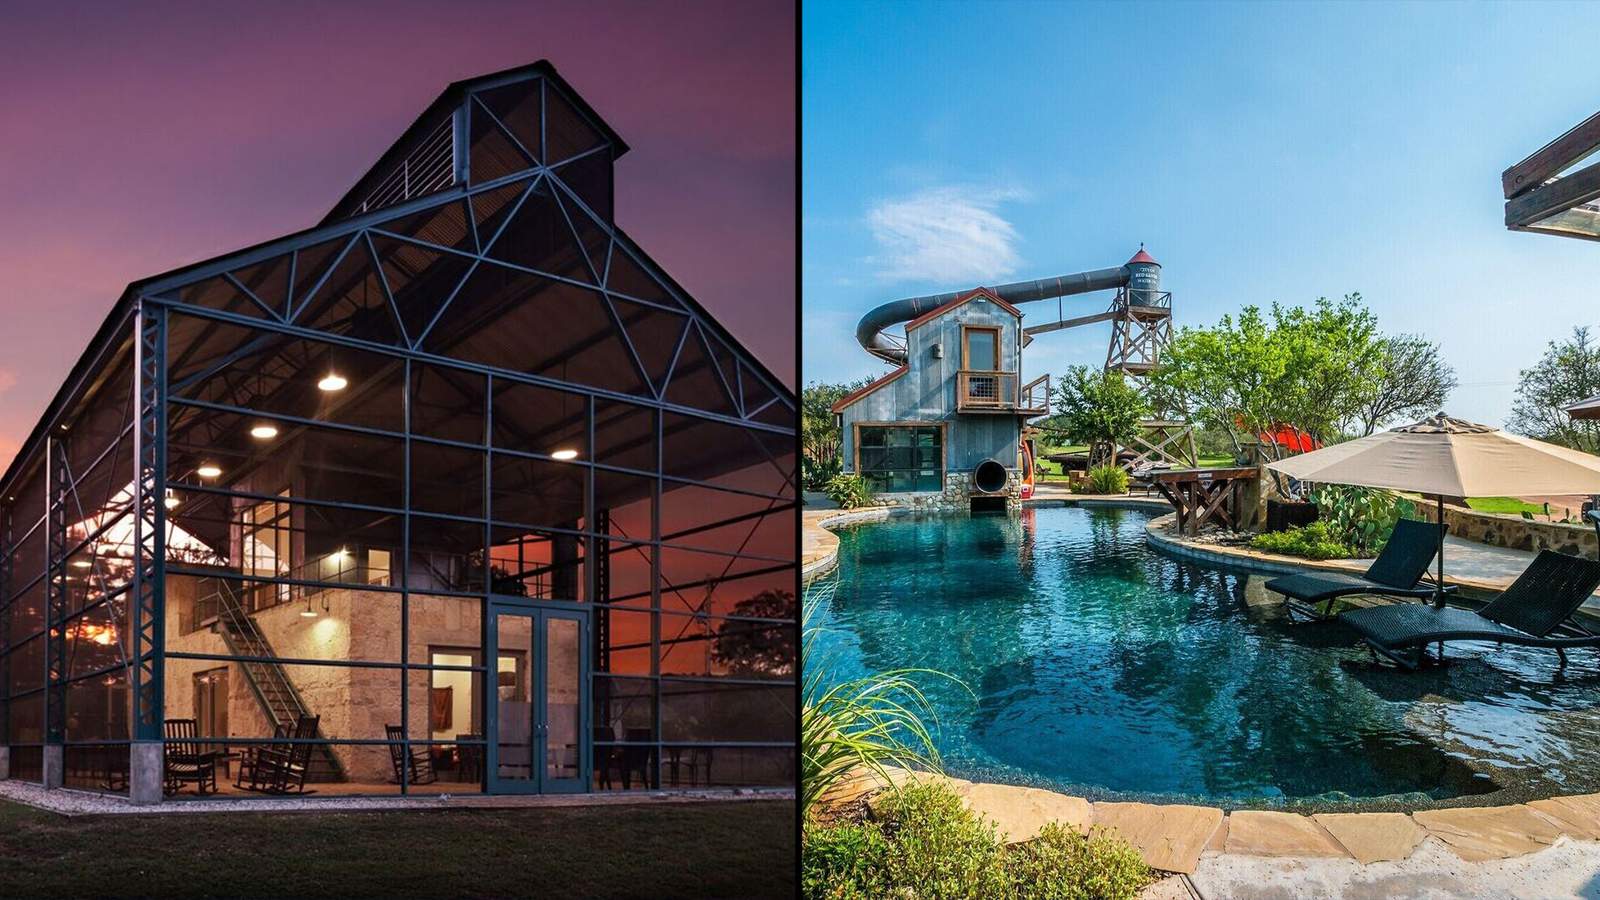 2 highly rated Vrbo vacation spots in Texas Hill Country up for grabs in contest